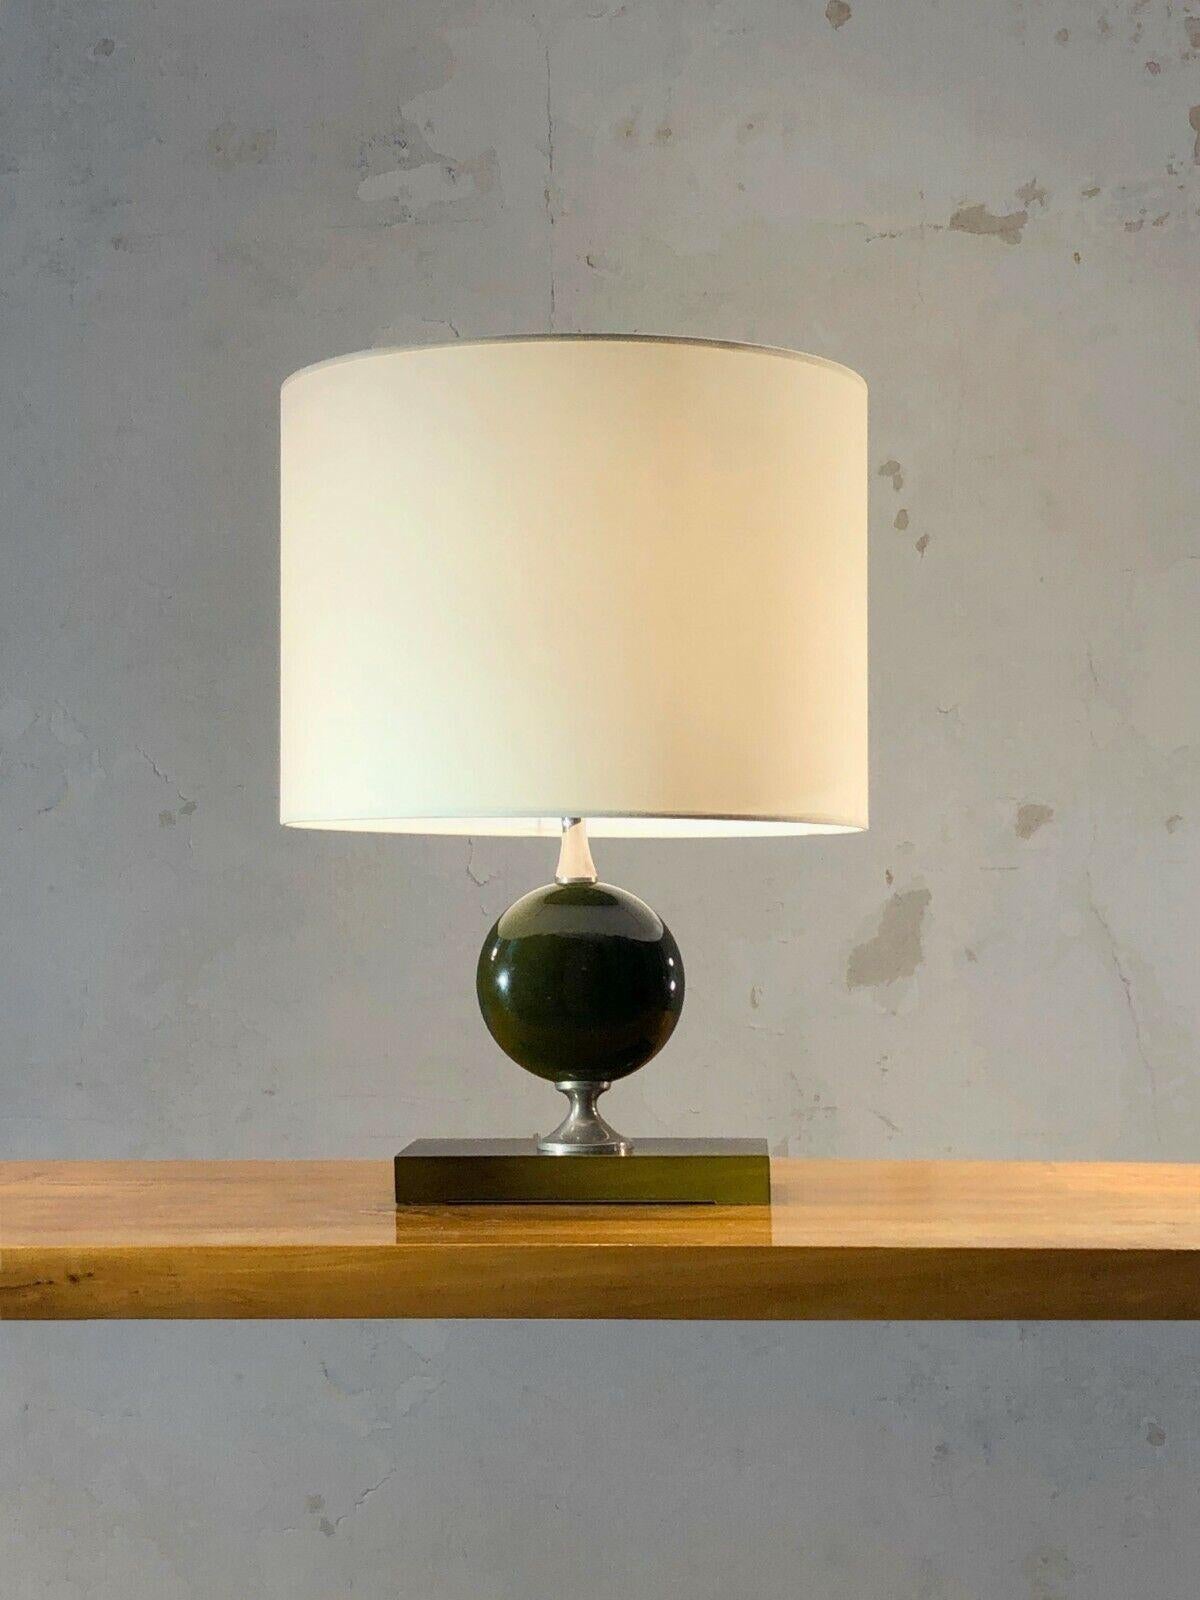 An elegant and singular table lamp, Pop, Post-Modernist, Psychedelic, Shabby-Chic, in lacquered metal in shades of khaki, with cylindrical lampshade, by Philippe Barbier, France 1970.

DIMENSIONS: 56 x 40 cm with lampshade in photo
Base only: 31.5 x